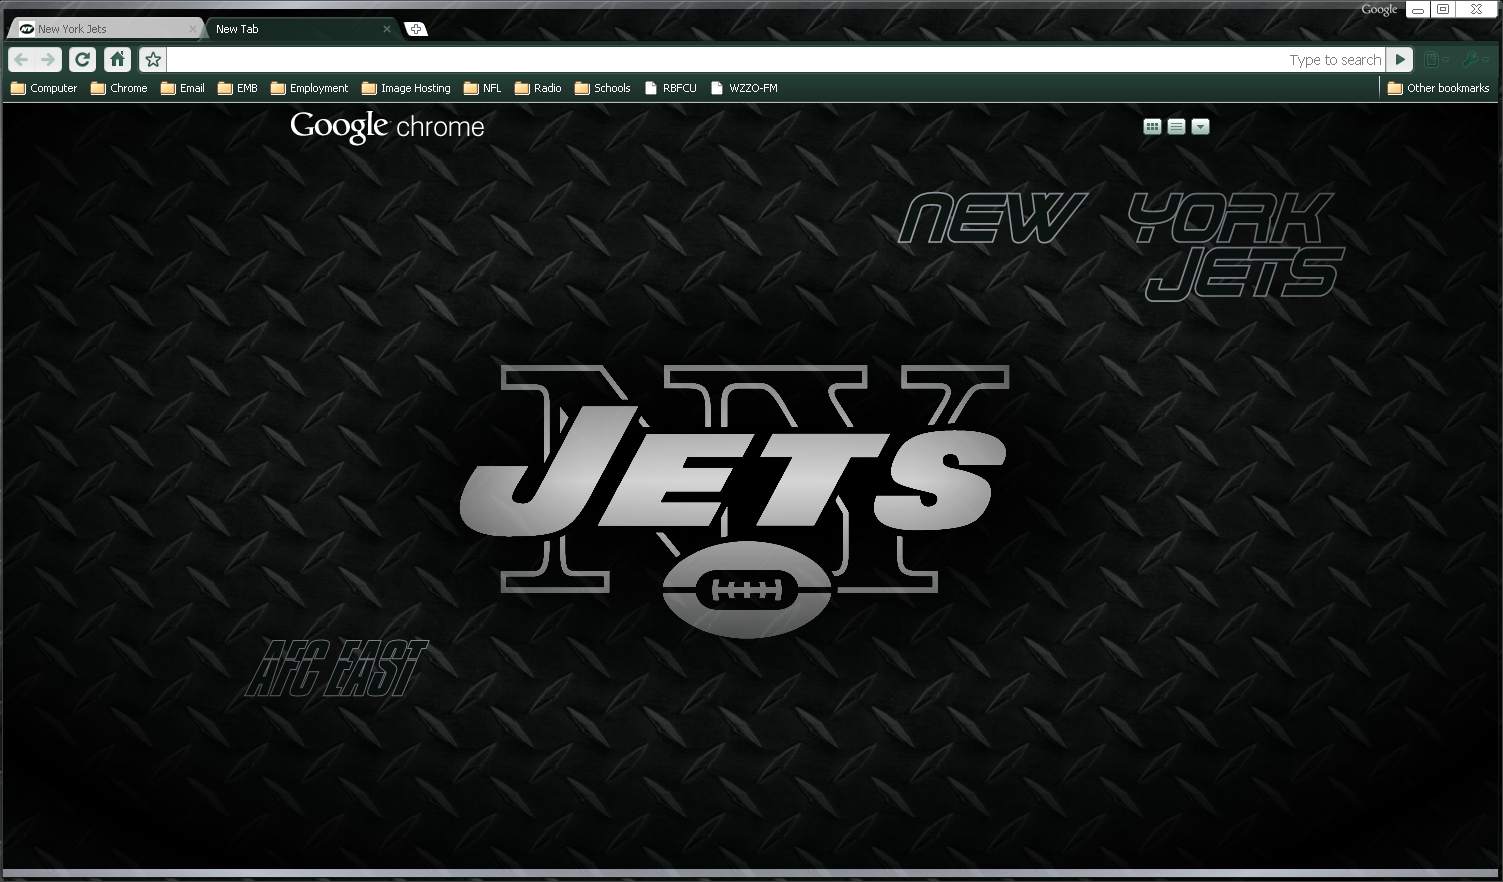 NY Jets 2010 DP Theme by wPfil on